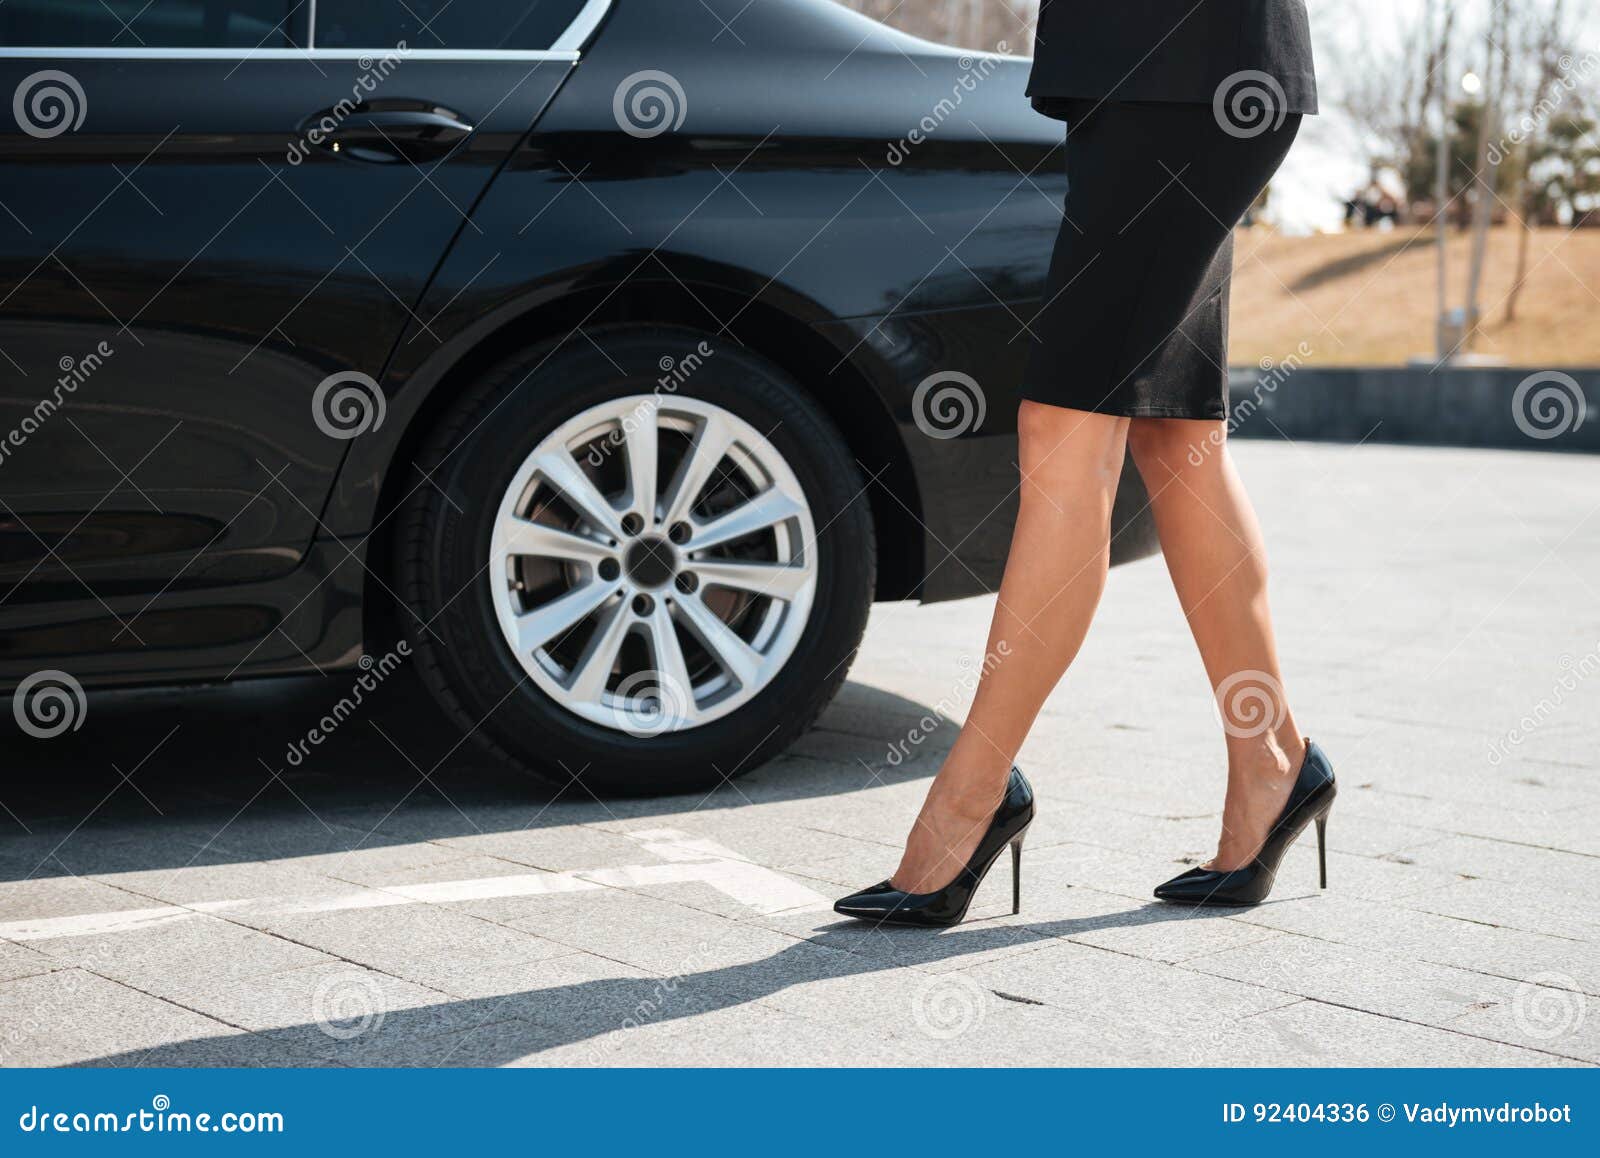 Legs of Businesswoman with High Heels Shoes Walking Near Car Stock ...